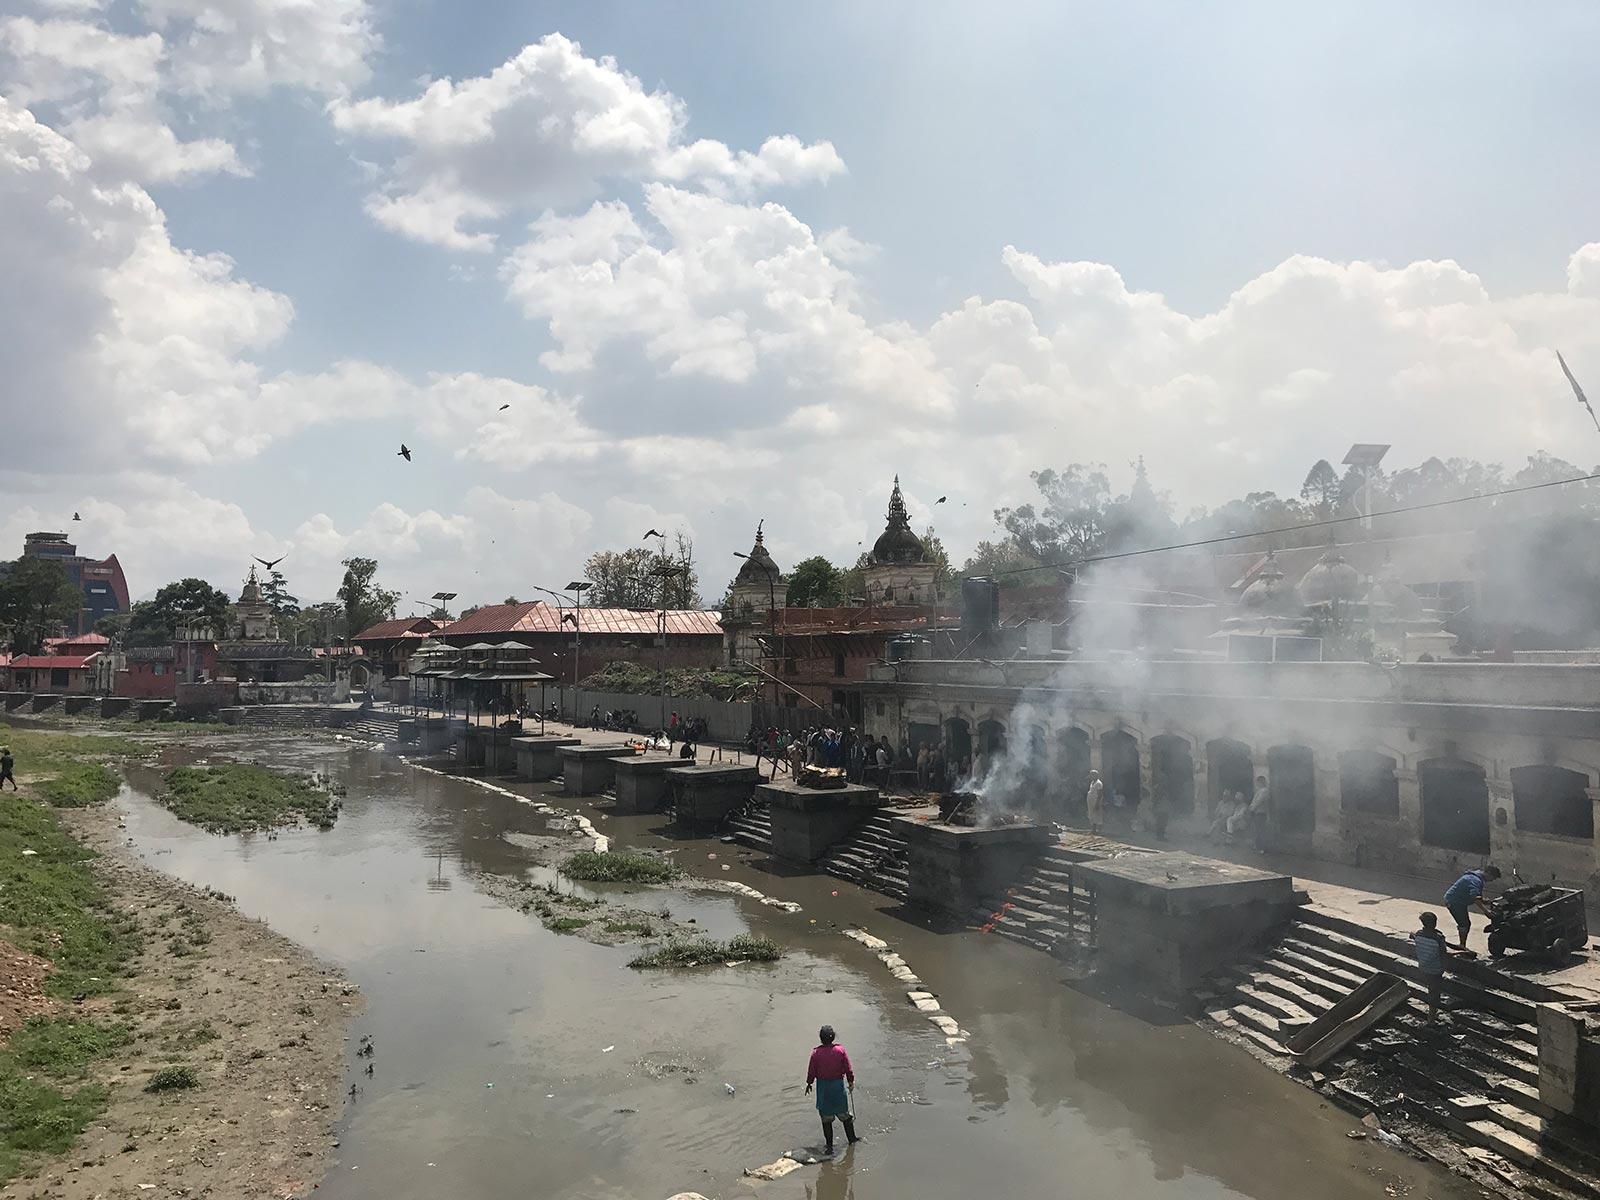 Place where they burn their dead in Kathmandu, Nepal. A smart deaf & dumb scam in Colombo